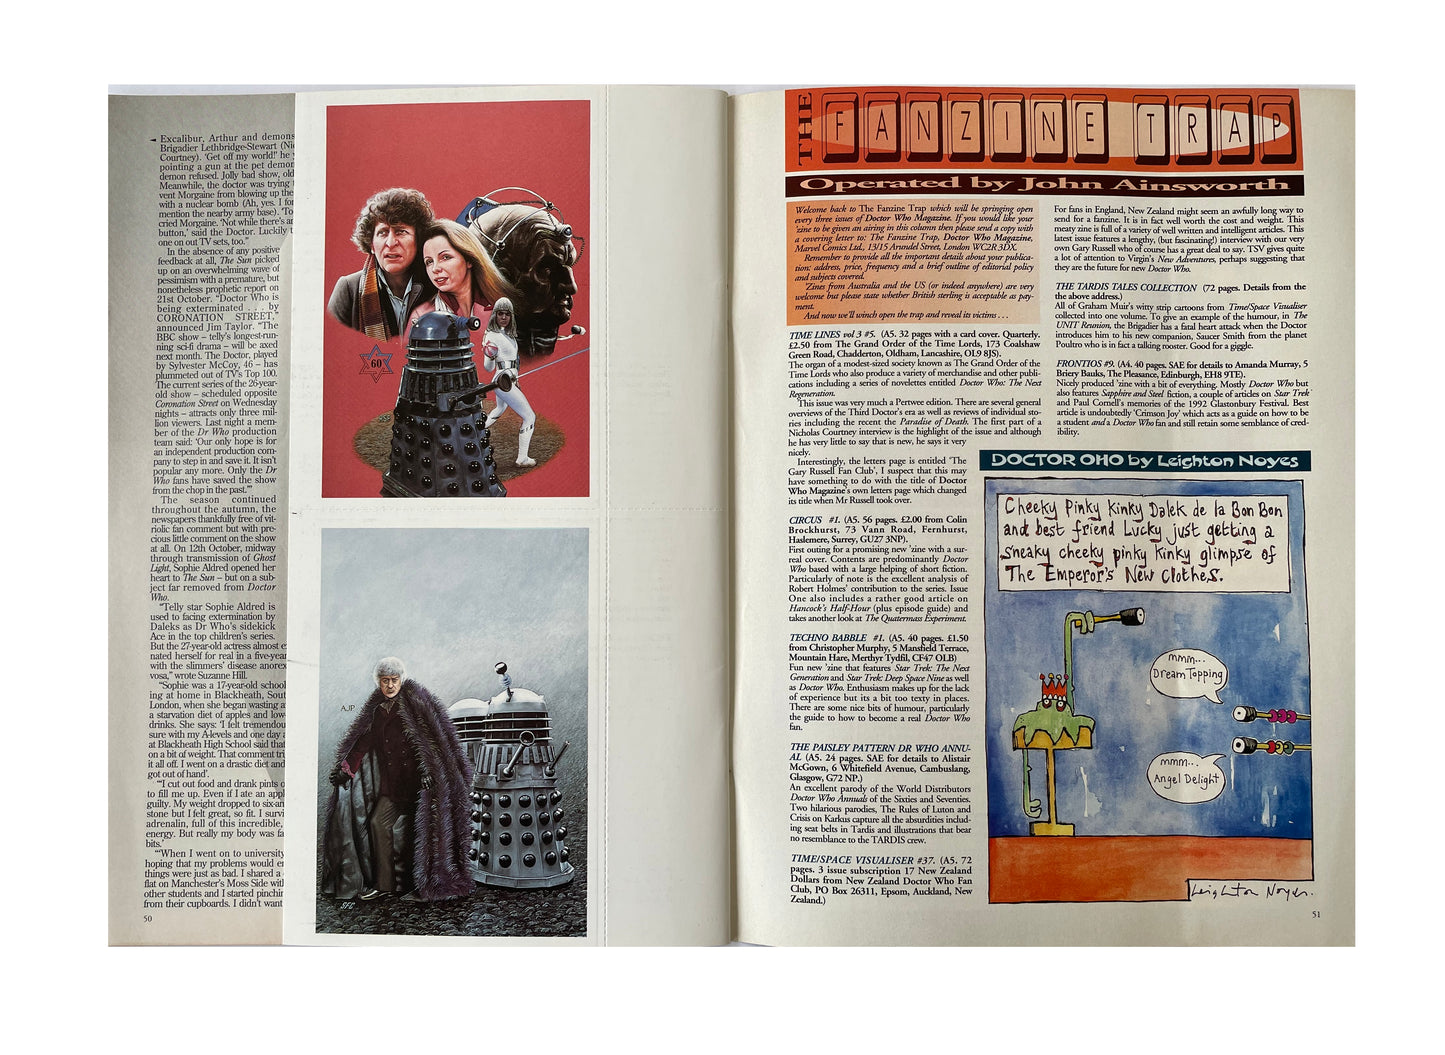 Vintage BBC Doctor Dr Who Magazine Issue Number 211 13th April 1994 - With Free Postcards - Shop Stock Room Find